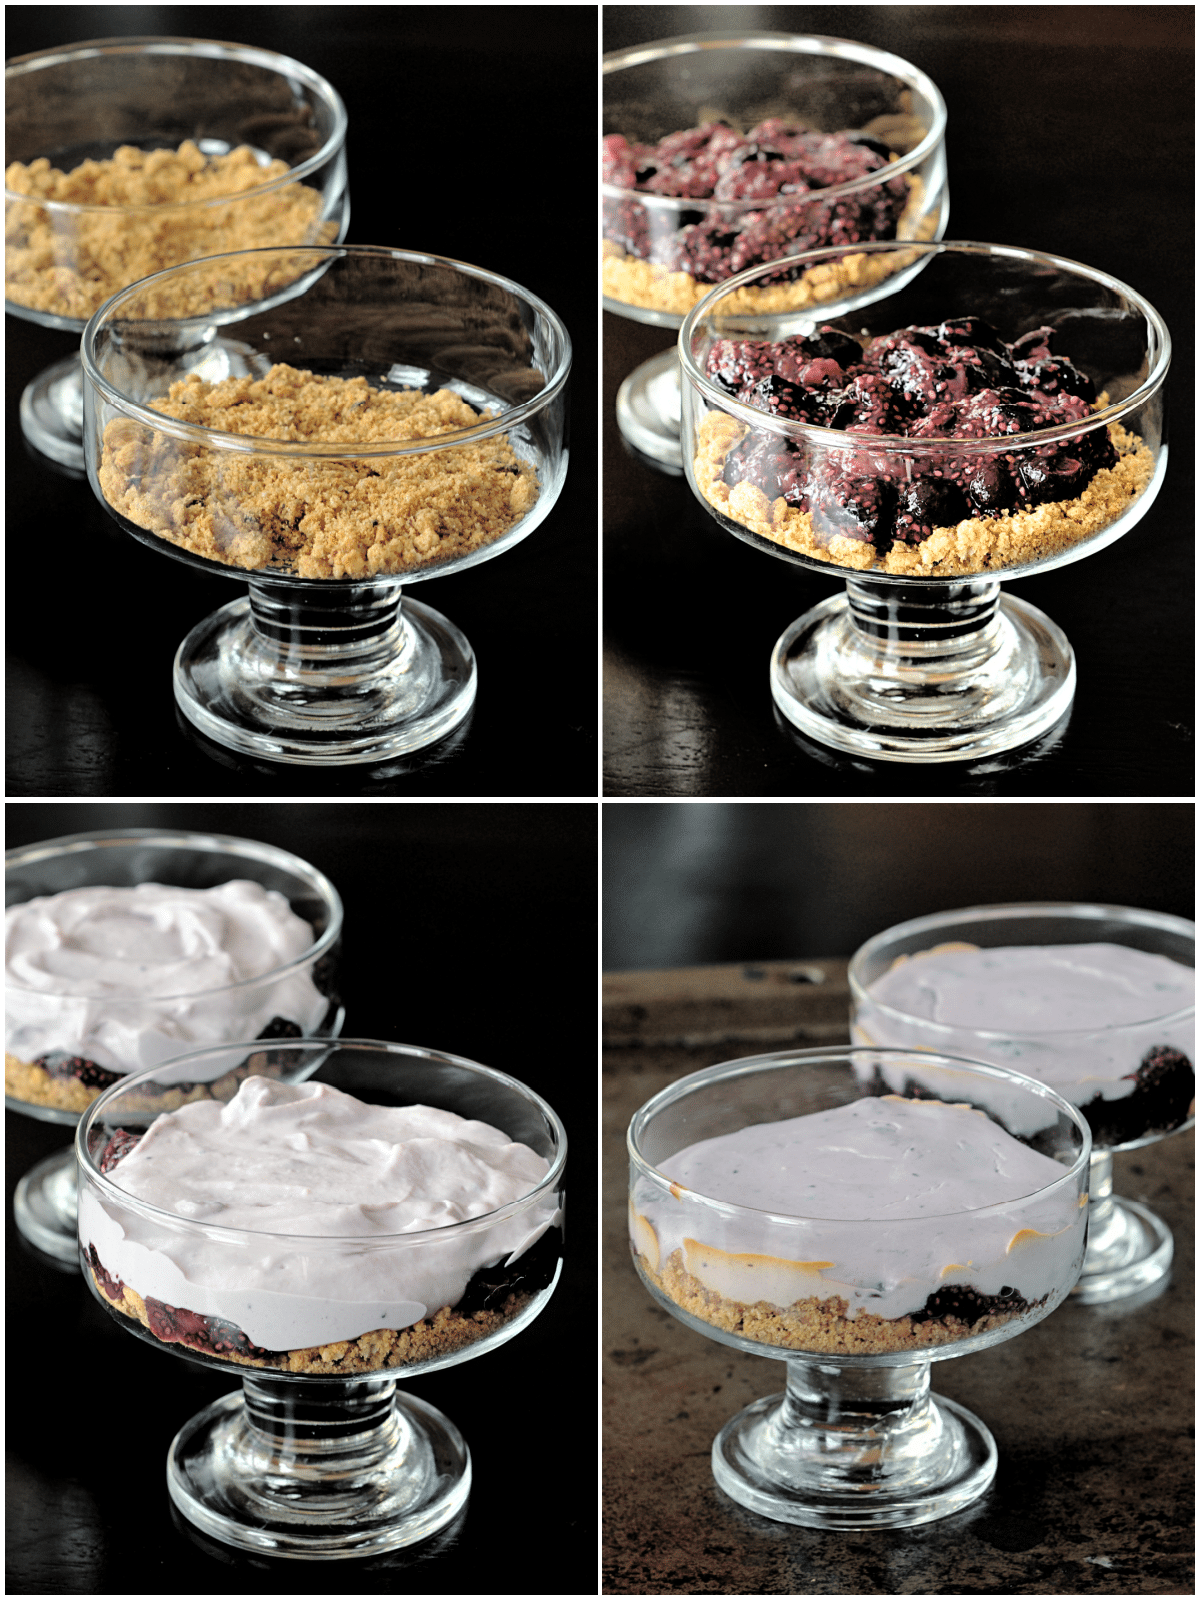 A four photo collage showing how to make baked berry custard: add granola base to a glass dish, add berries, add yogurt custard mixture, and bake.